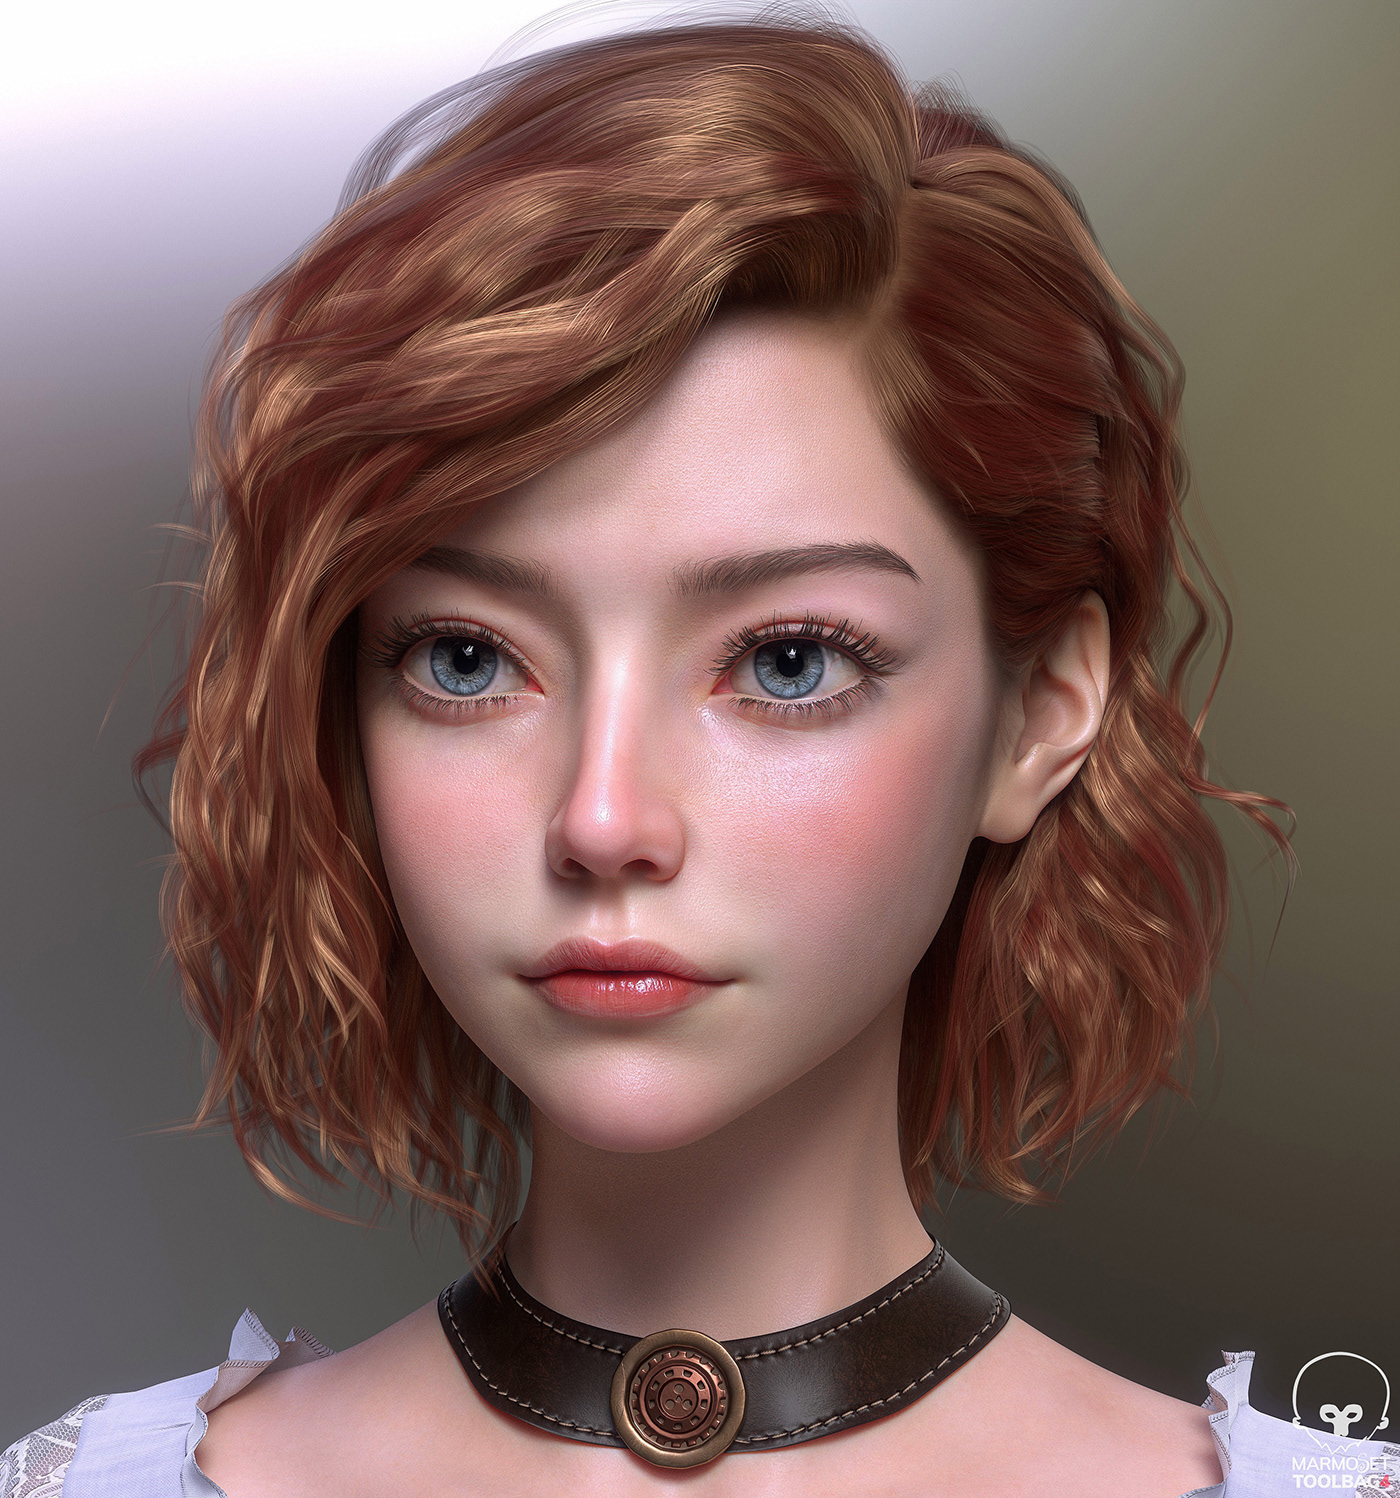 3D 3D Character 3d modeling character modeling lighting texturing real time rendering realistic style